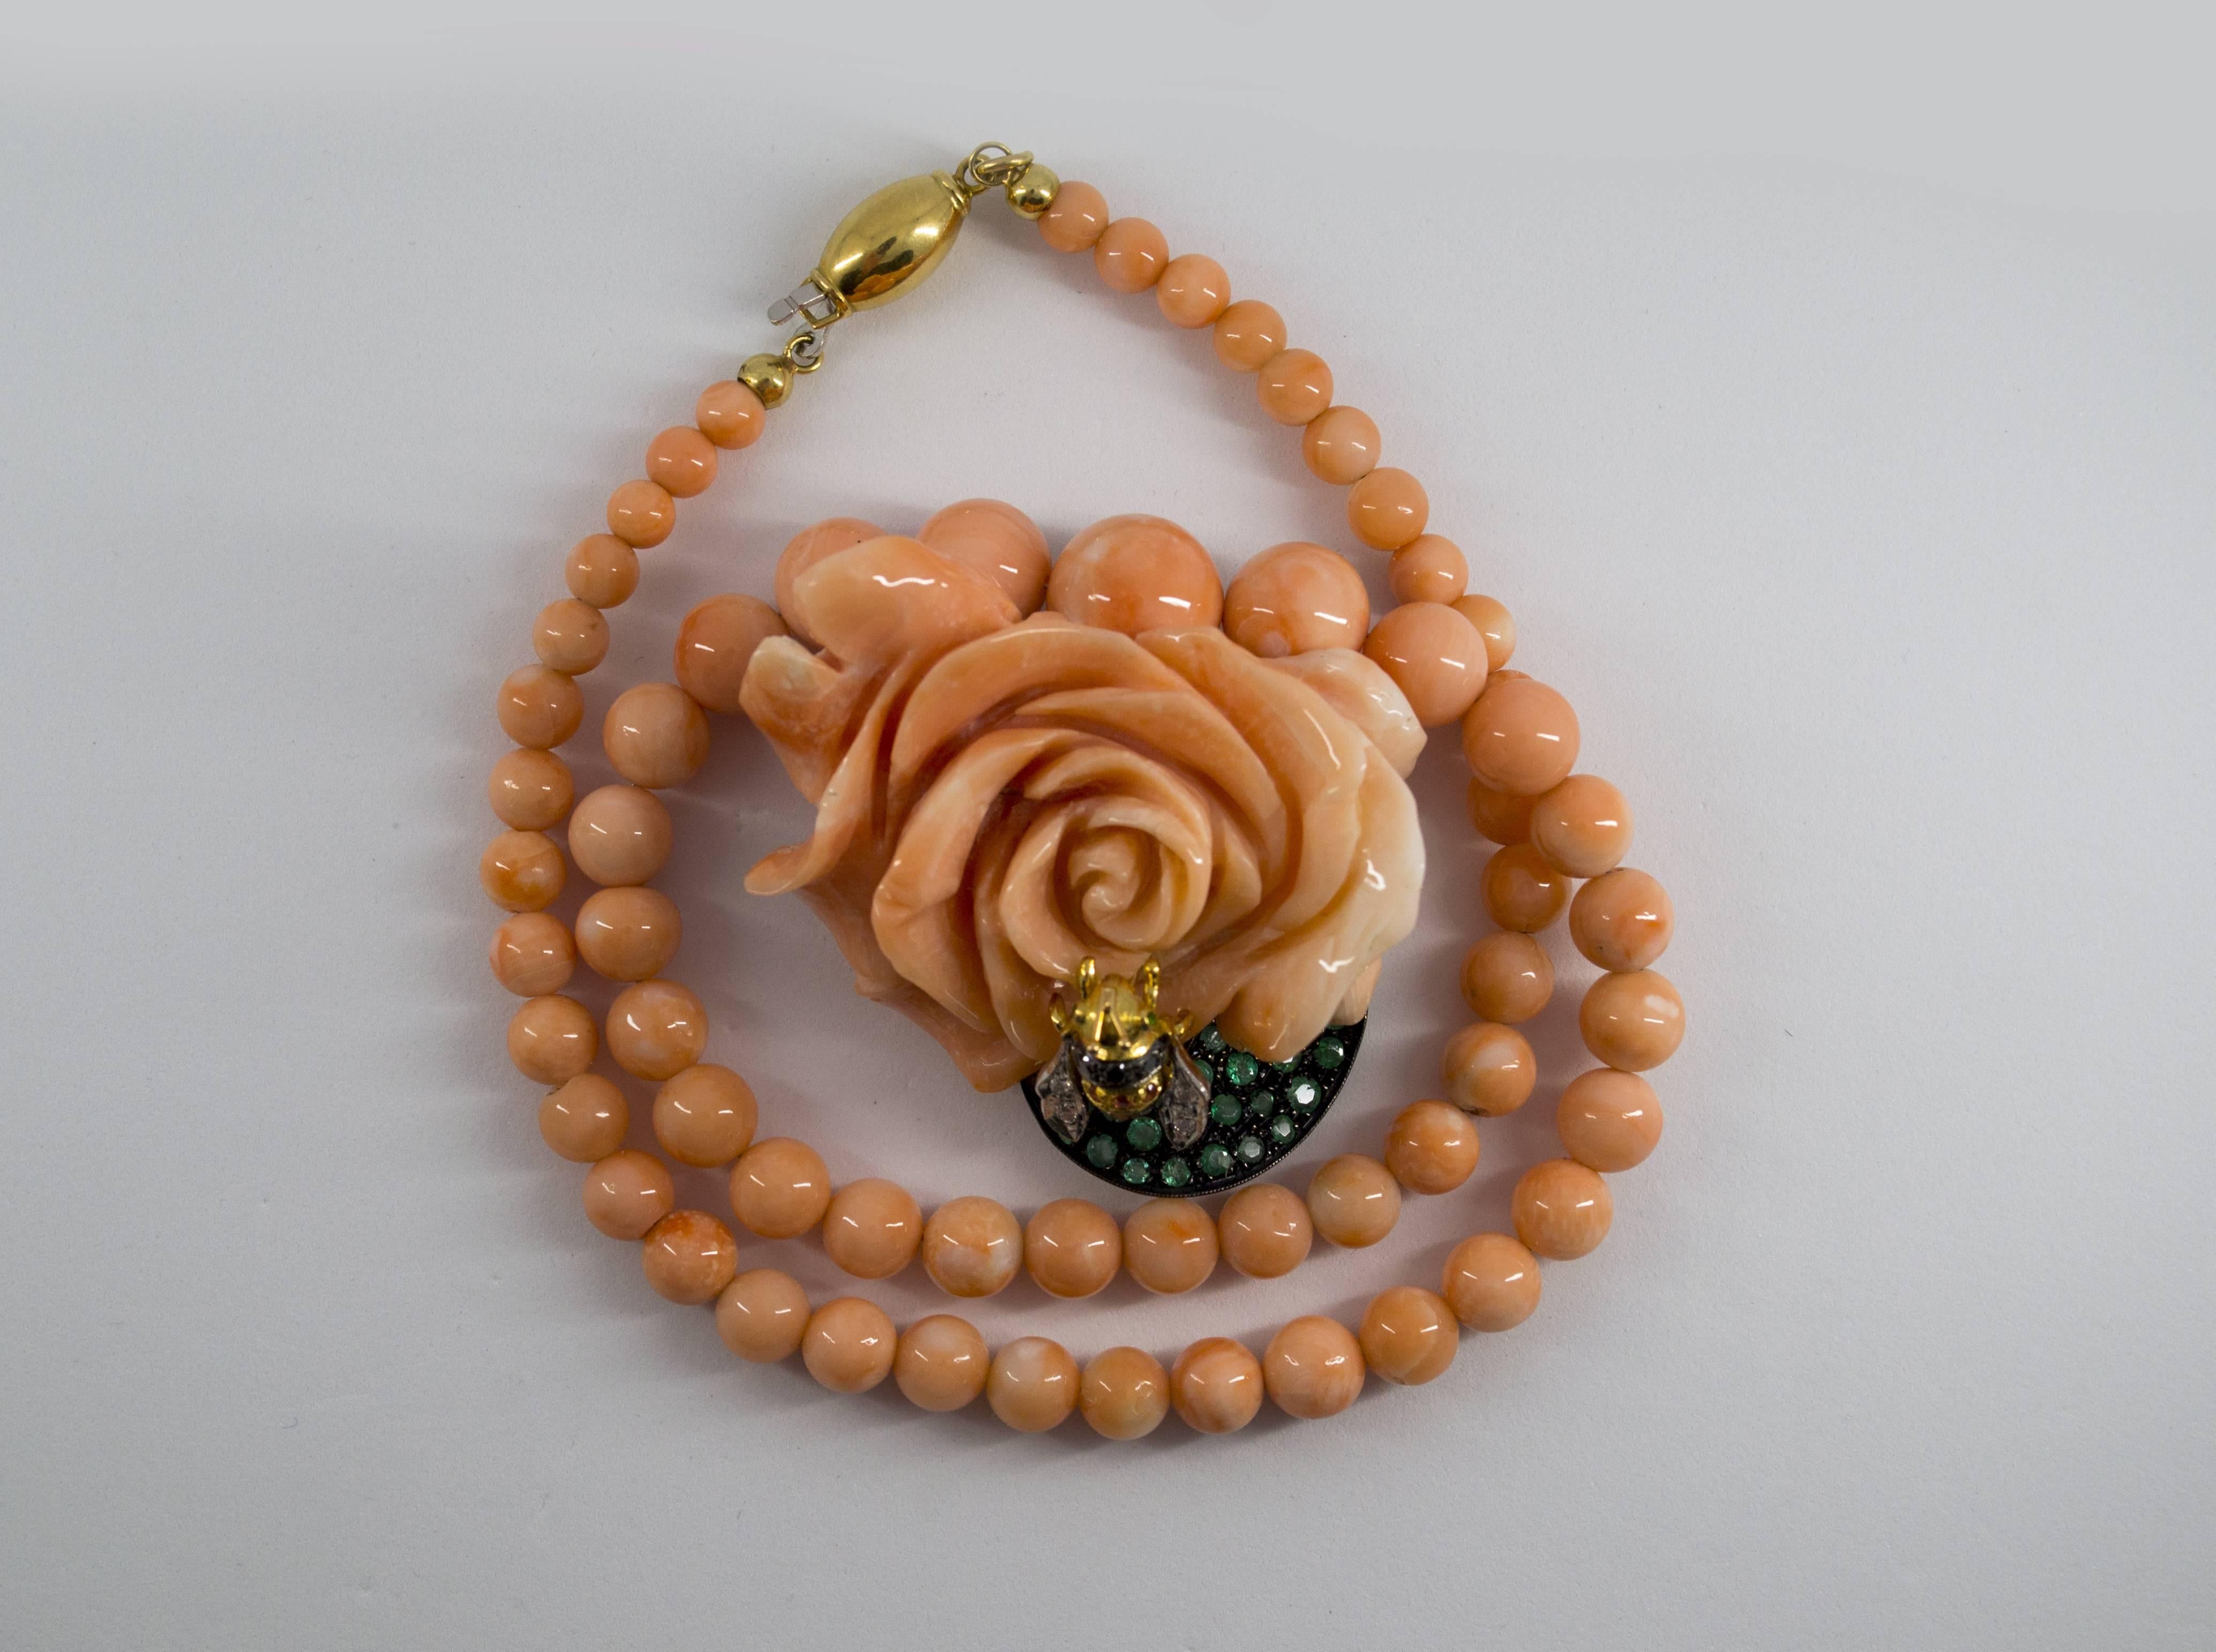 This Necklace is made of 18K Yellow Gold and Pink Coral.
This Necklace has 0.20 Carats of White and Black Diamonds.
This Necklace has 1.40 Carats of Emeralds and Yellow Sapphire.
The Length of the Necklace is 25cm.
We're a workshop so every piece is